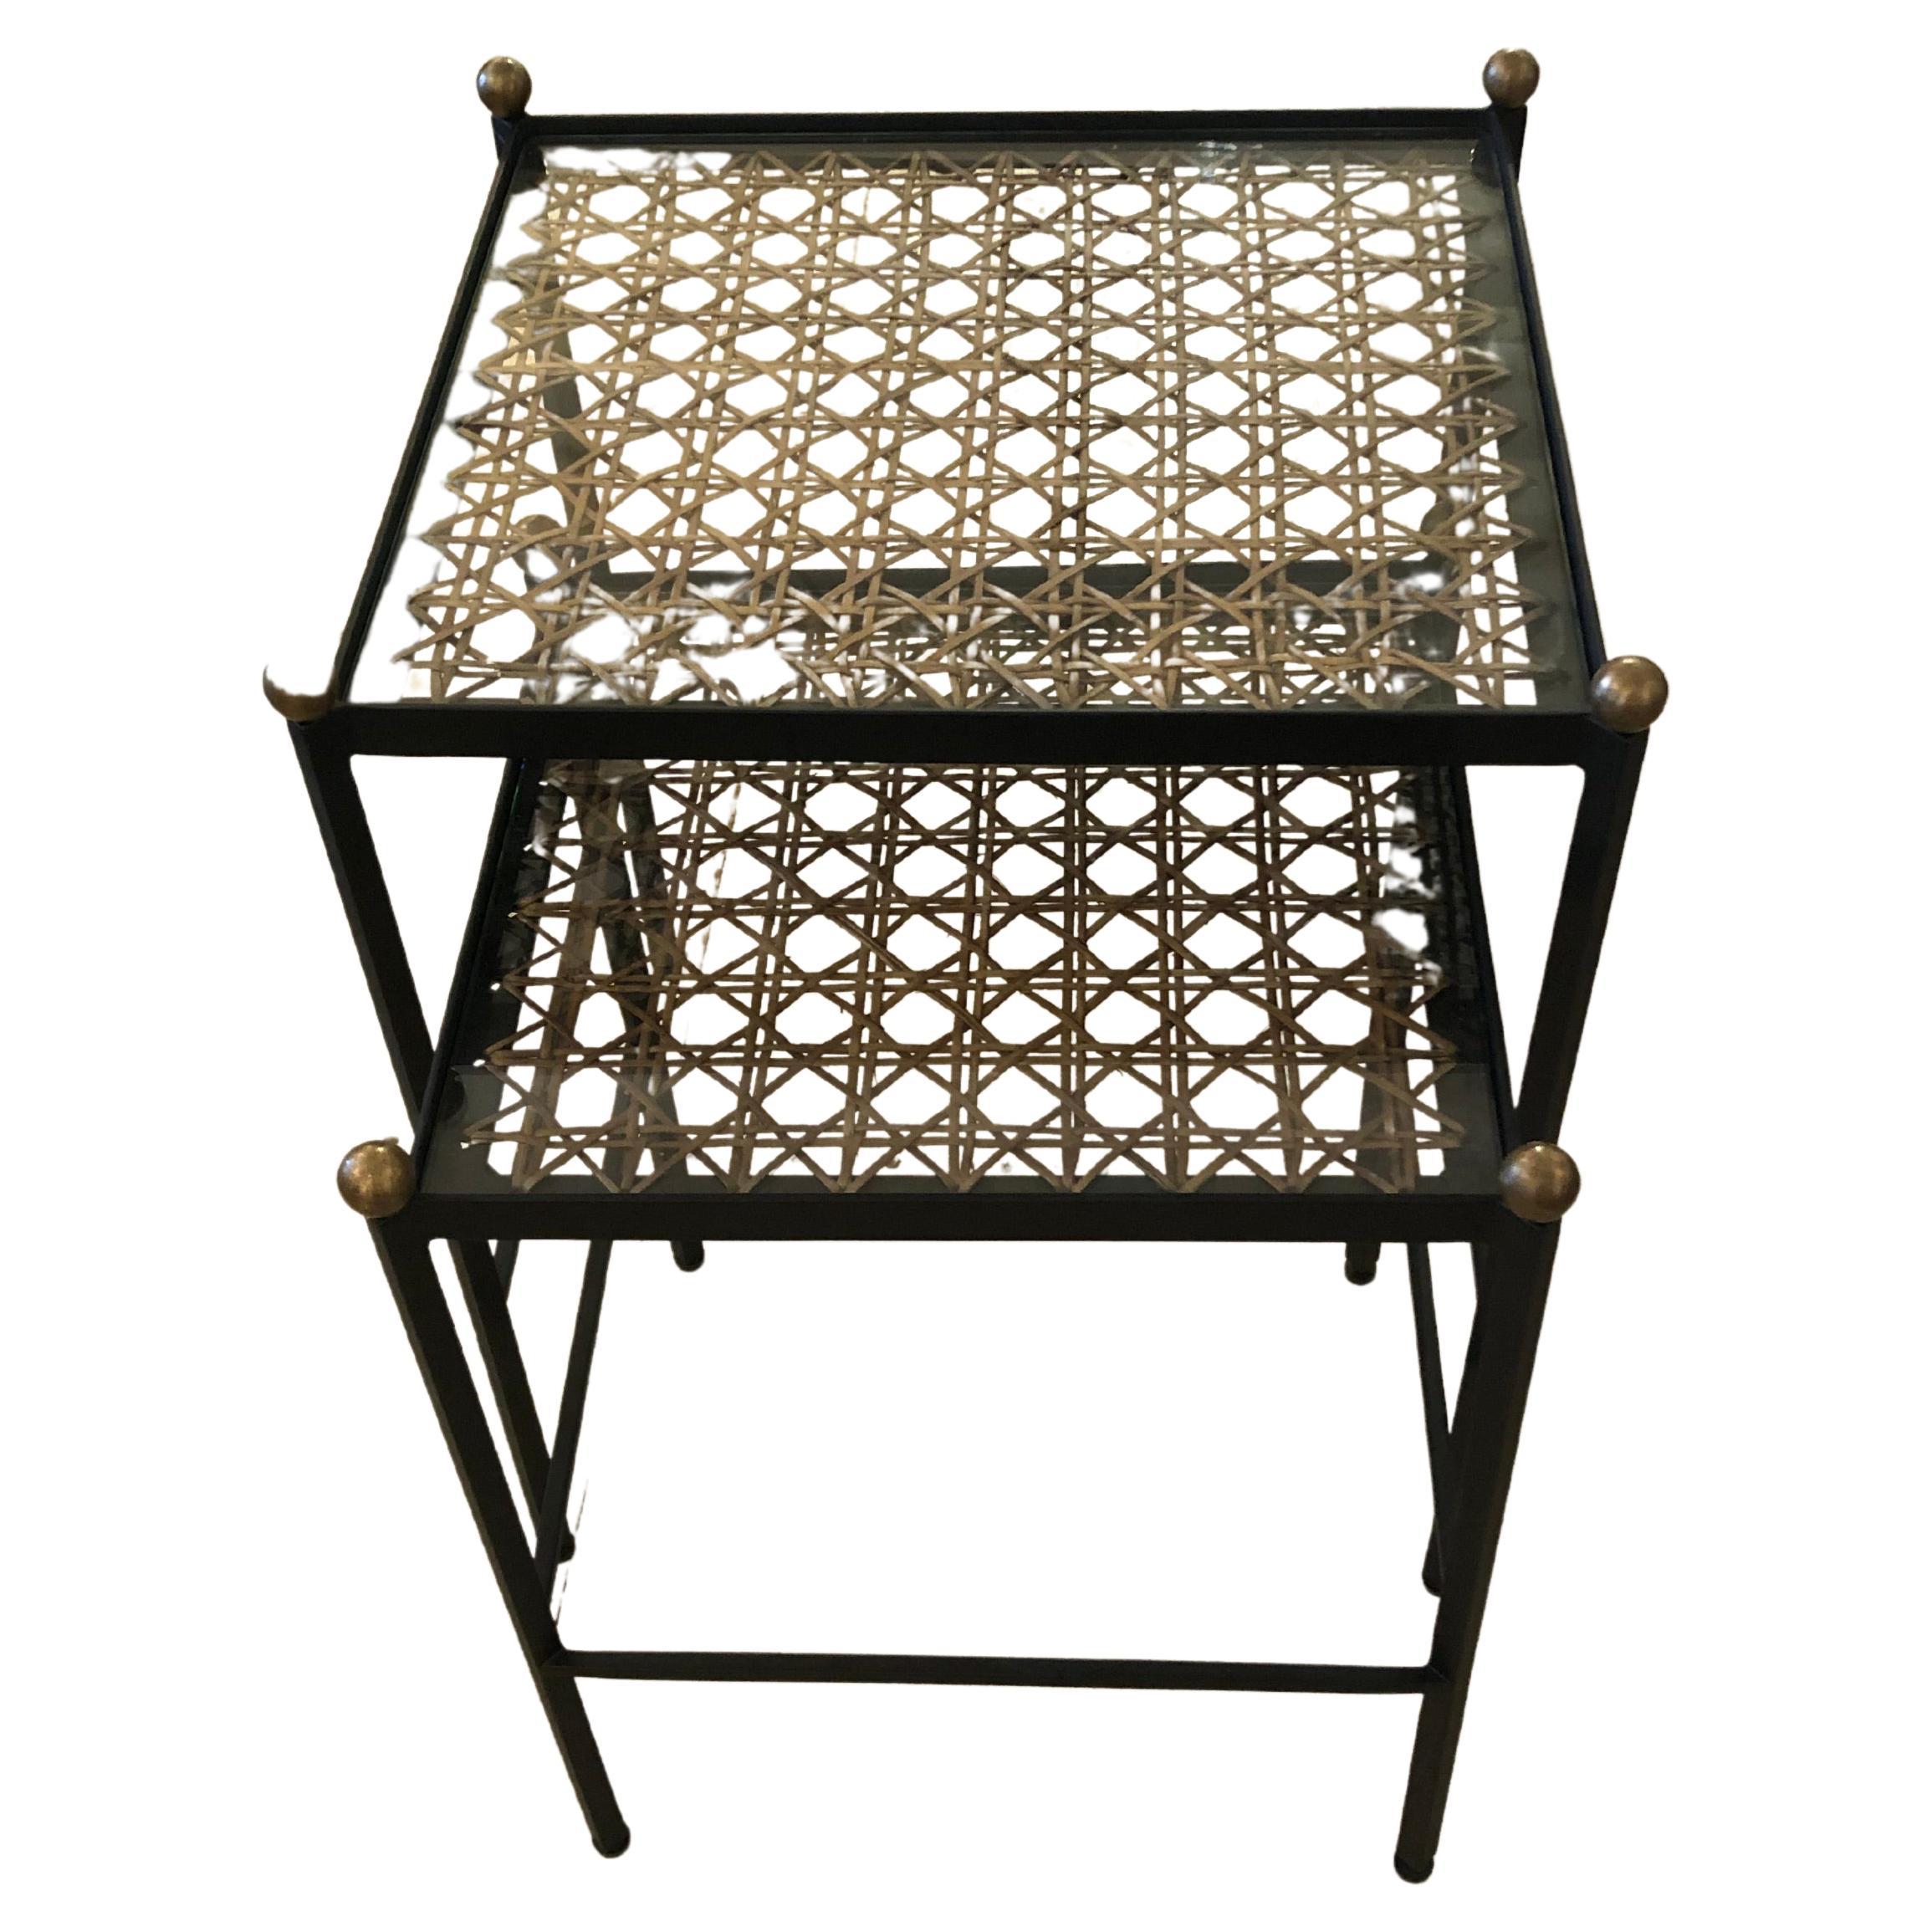 Set of 2 Great Looking Metal Cane and Brass Nesting Tables